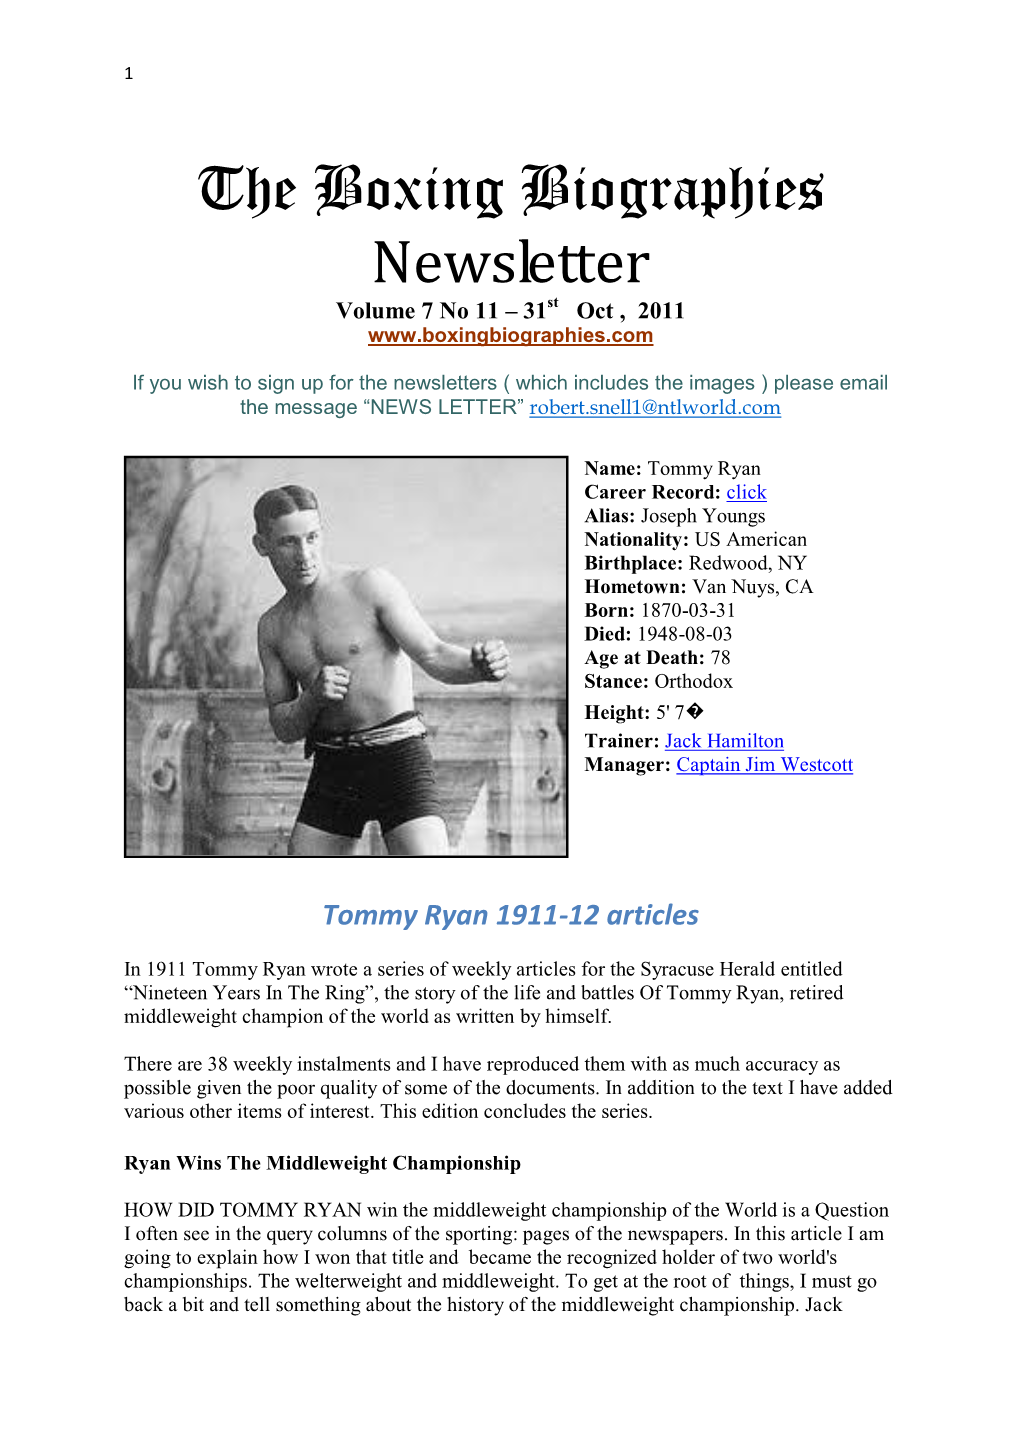 The Boxing Biographies Newsletter